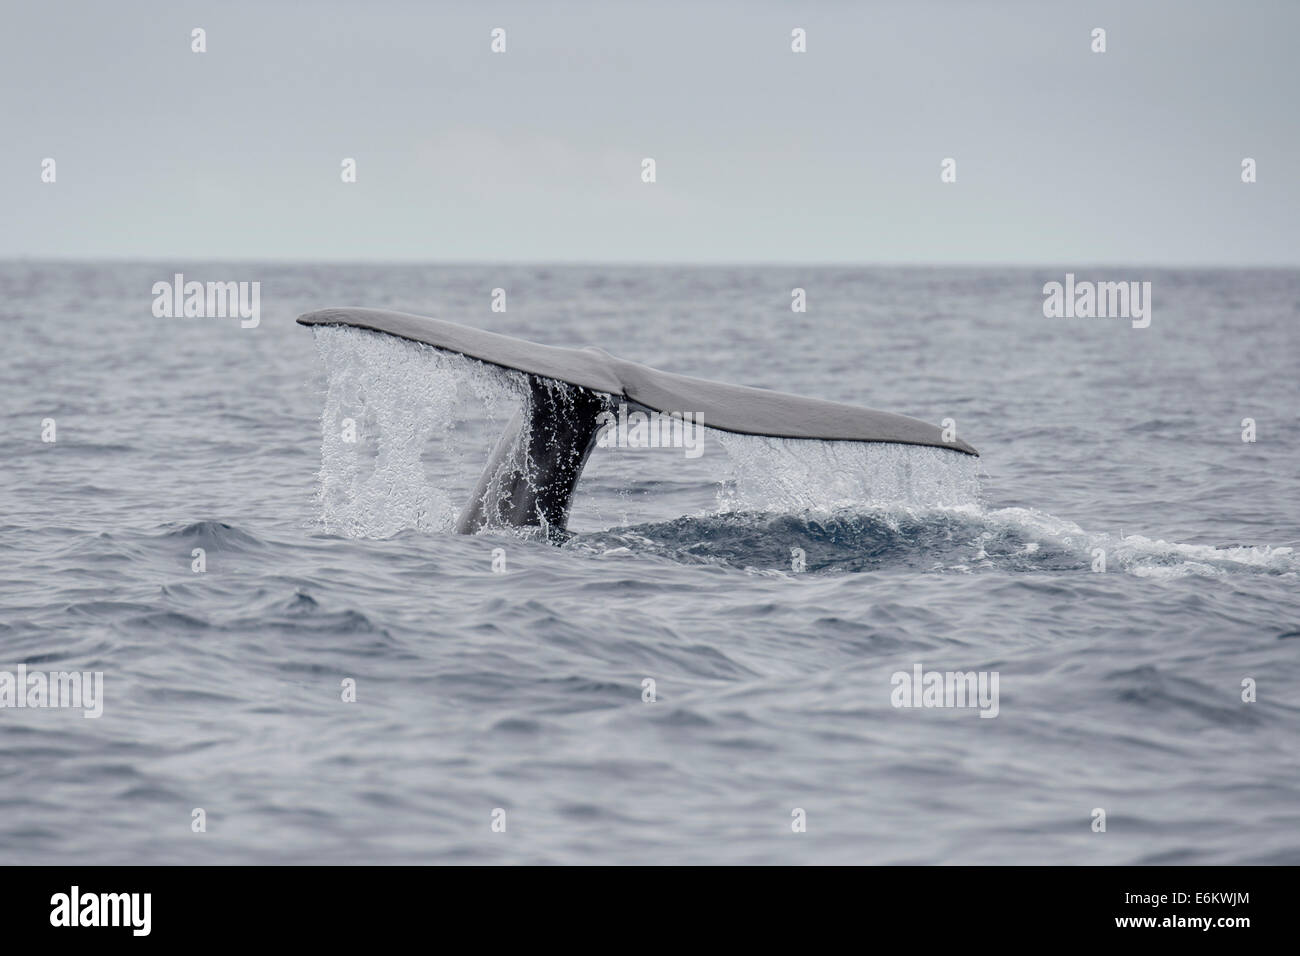 Sperm Whale, Physeter macrocephalus, fluking at the surface. Azores, Atlantic Ocean. Stock Photo